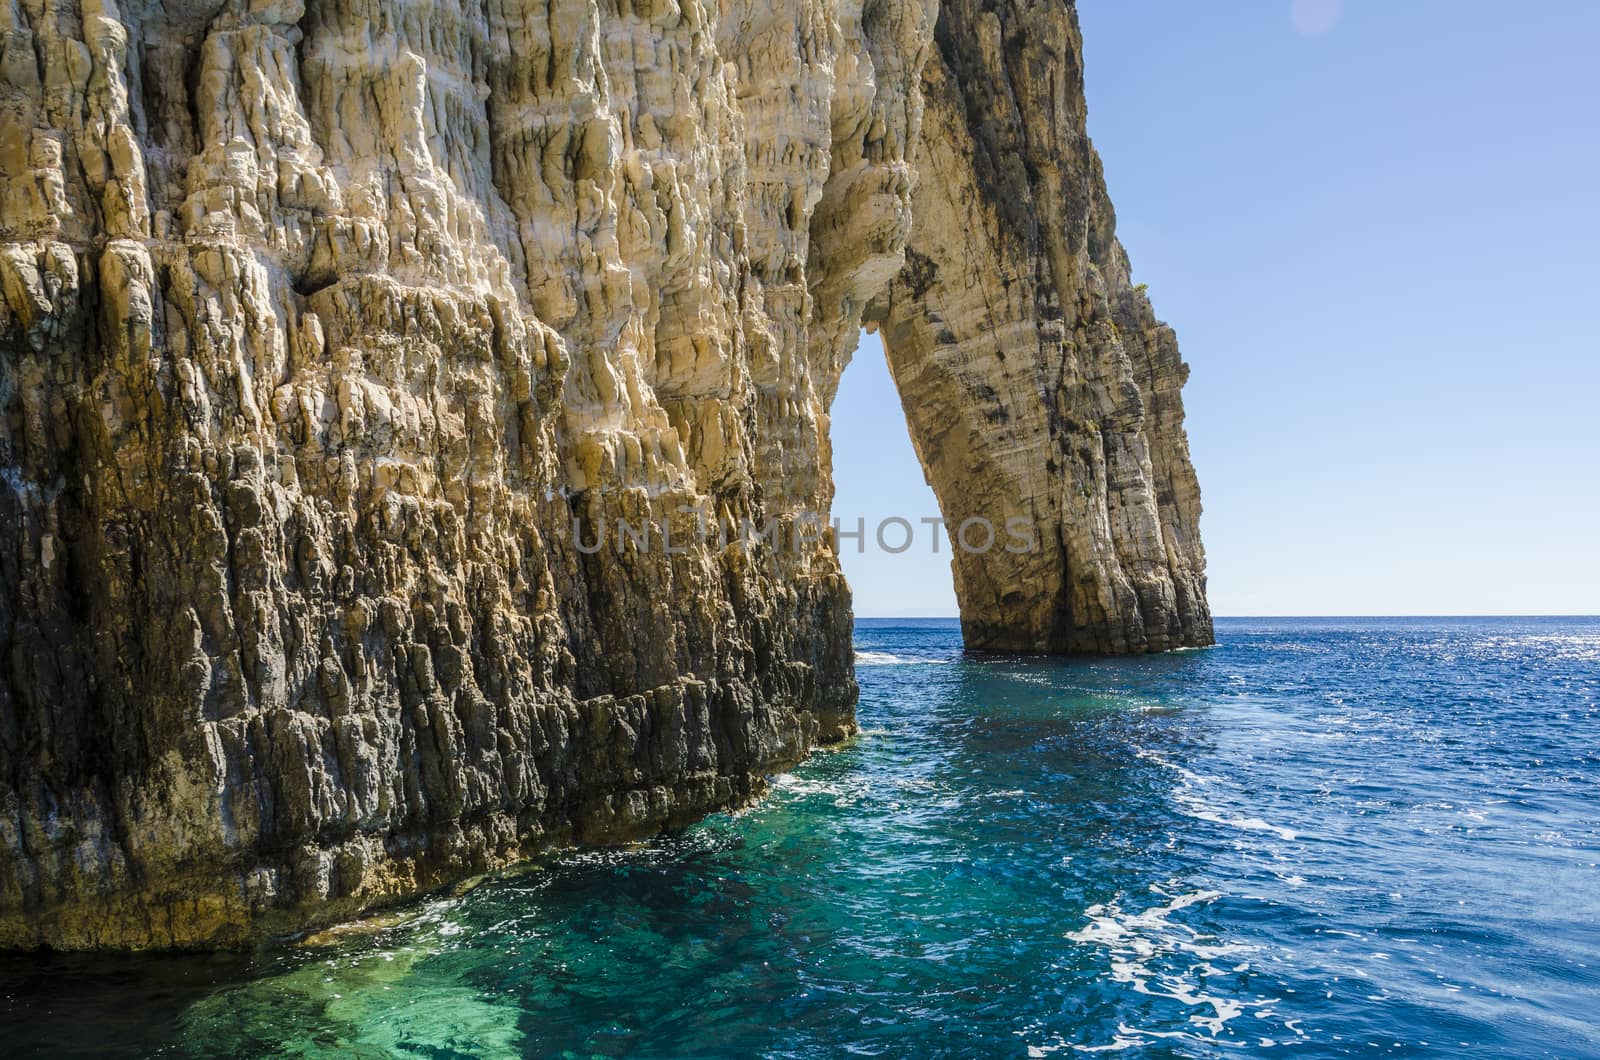 view of reefs with an opening pierced by the Ionian sea on the shores of the island of zakynthos